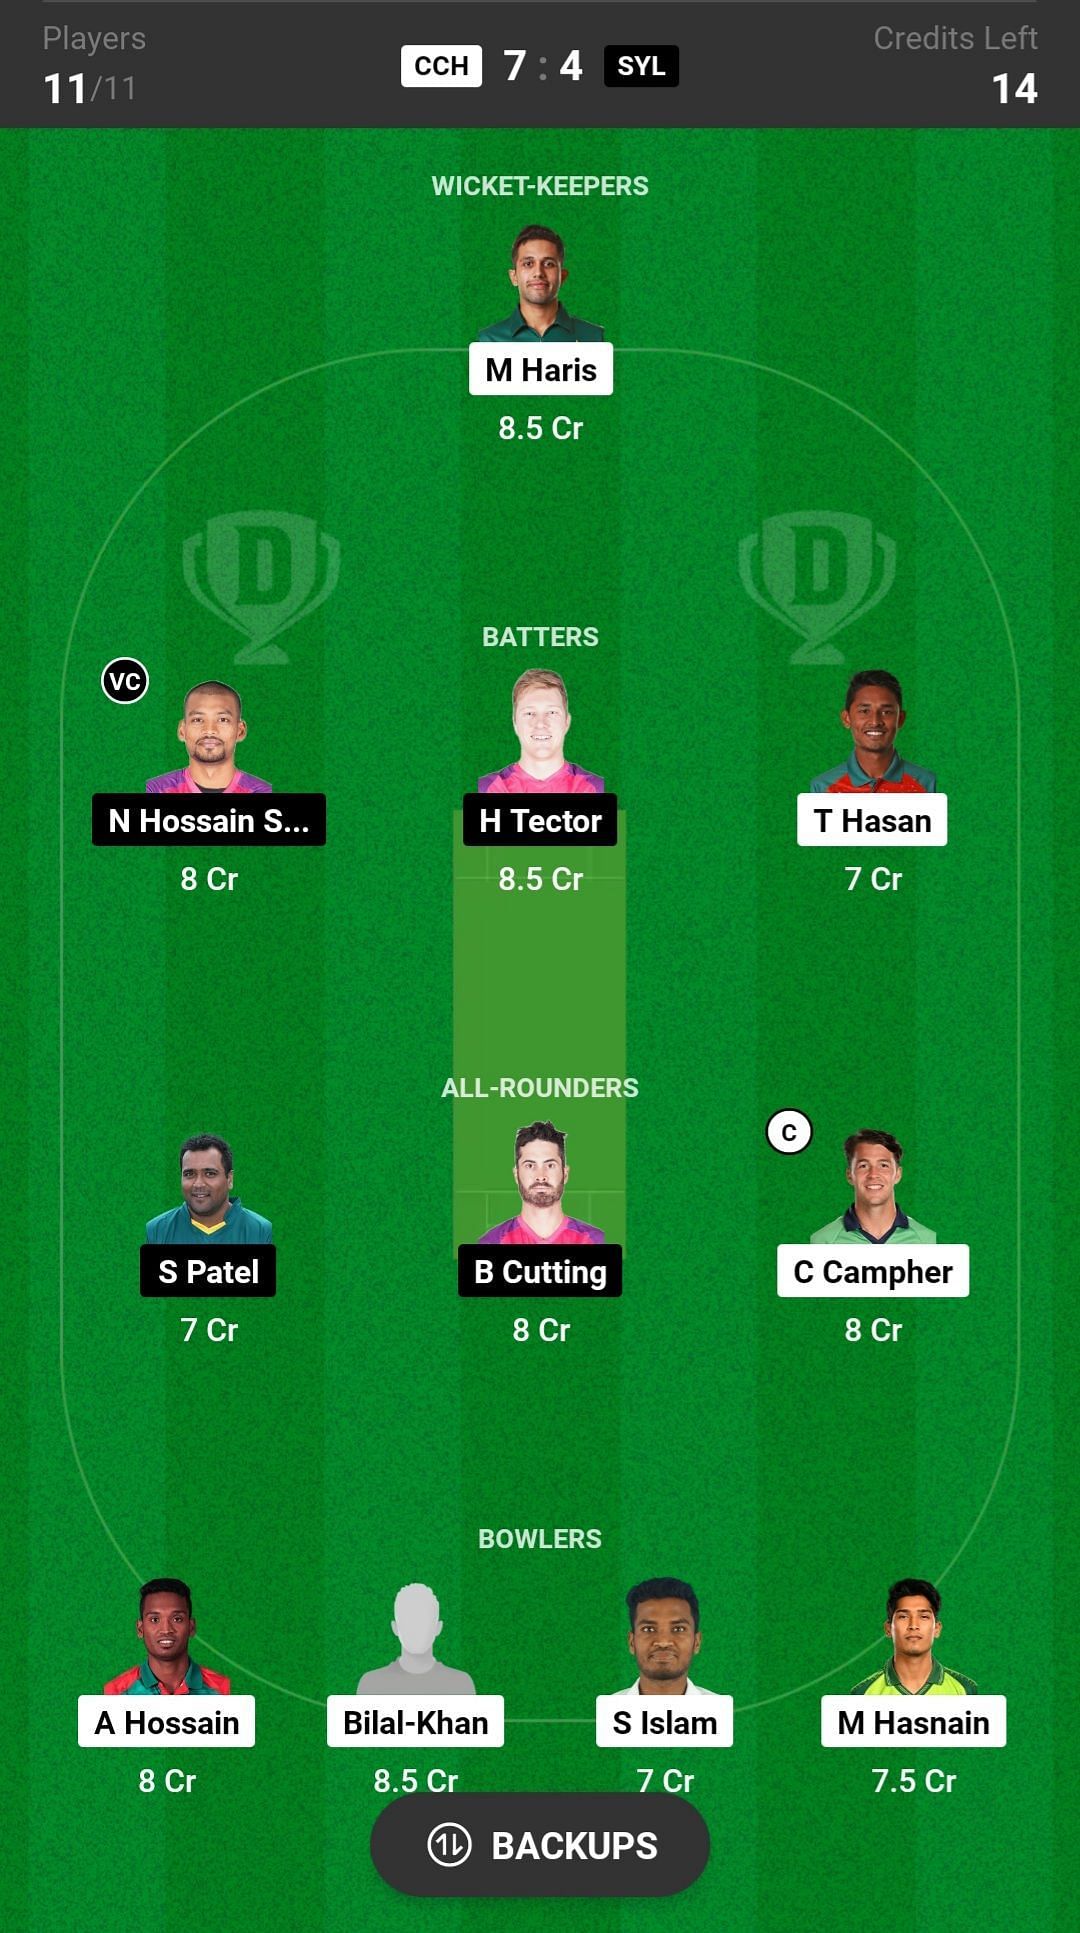 Chattogram Challengers vs Sylhet Strikers Dream11 Prediction Today, Head-to-head